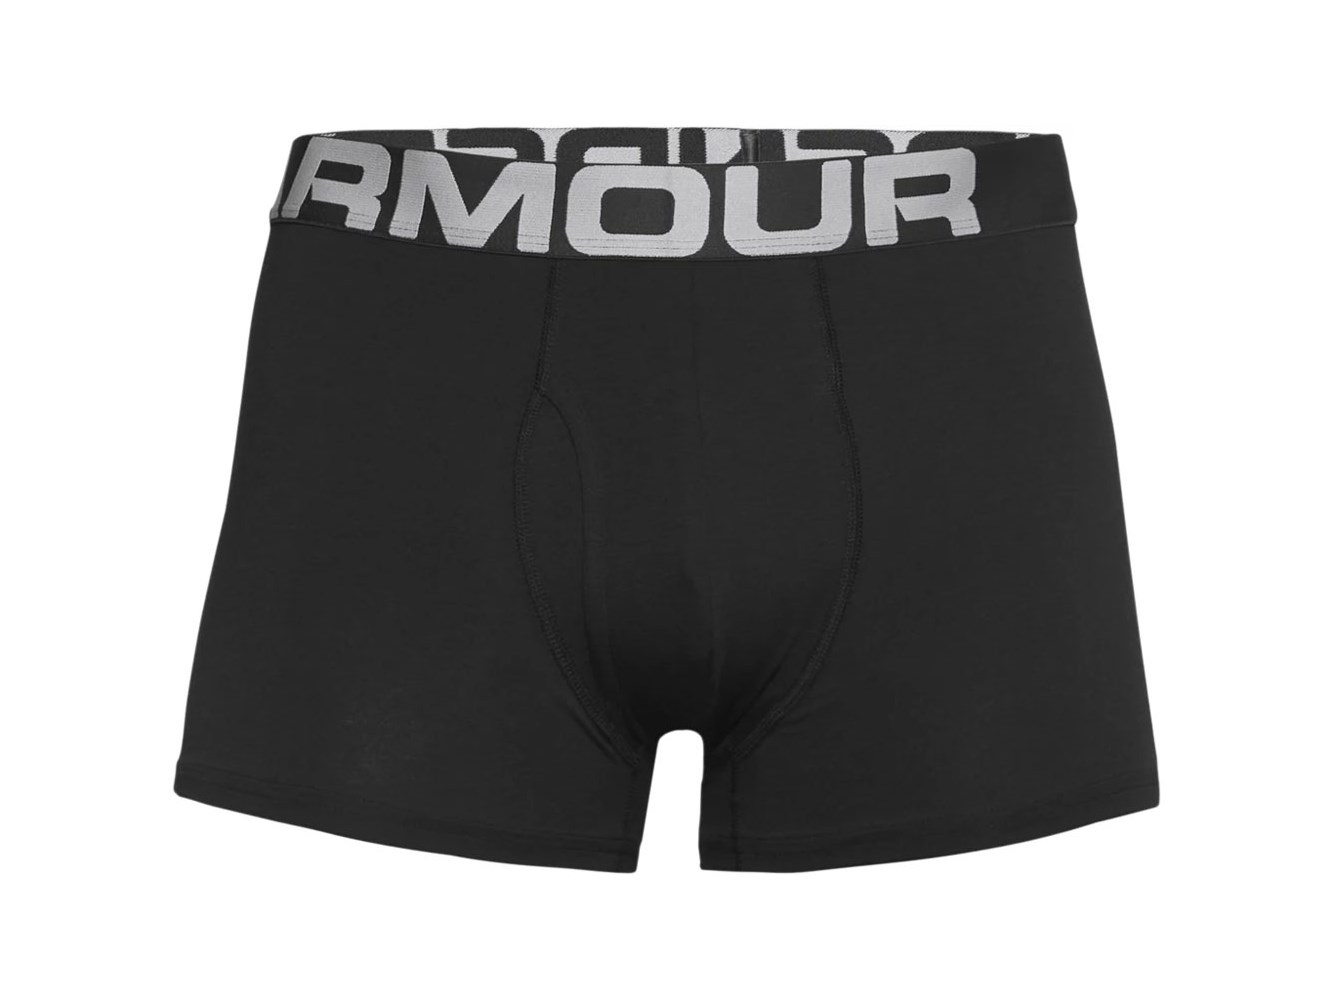 Under Armour Mens Charged Cotton 3 Inch Boxerjock Shorts (3 Pack)